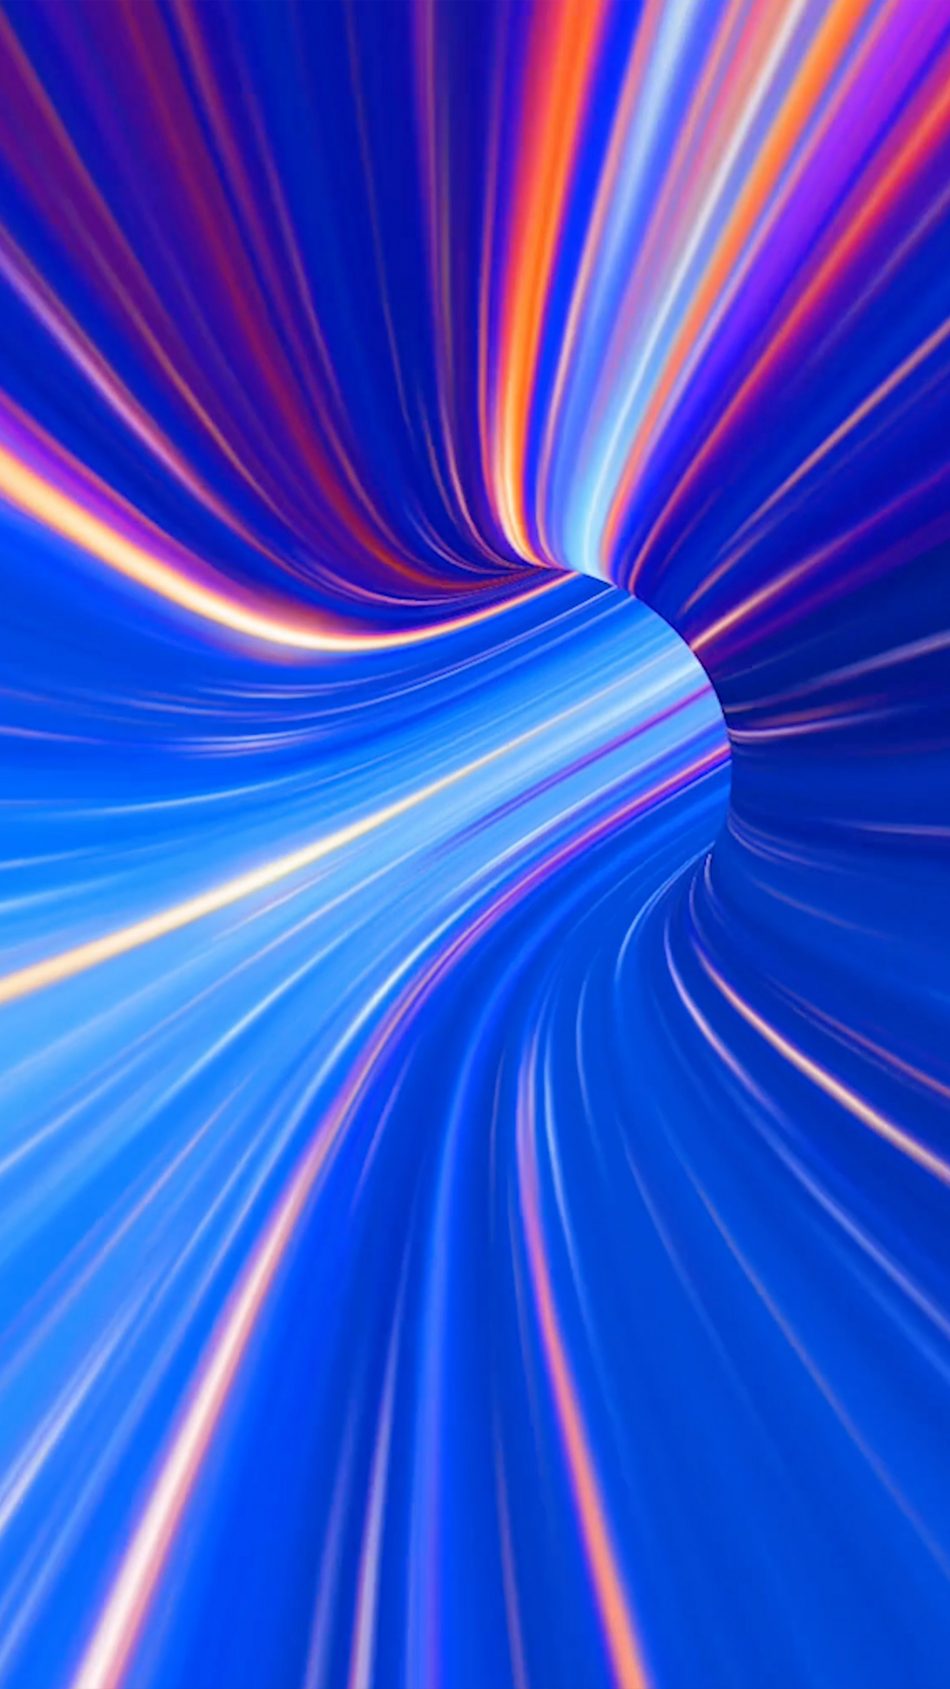 Spectrum Colorful Waves Tunnel 4k Ultra Hd Mobile Wallpaper - Ultra Hd Neon Wallpapers 4k - HD Wallpaper 